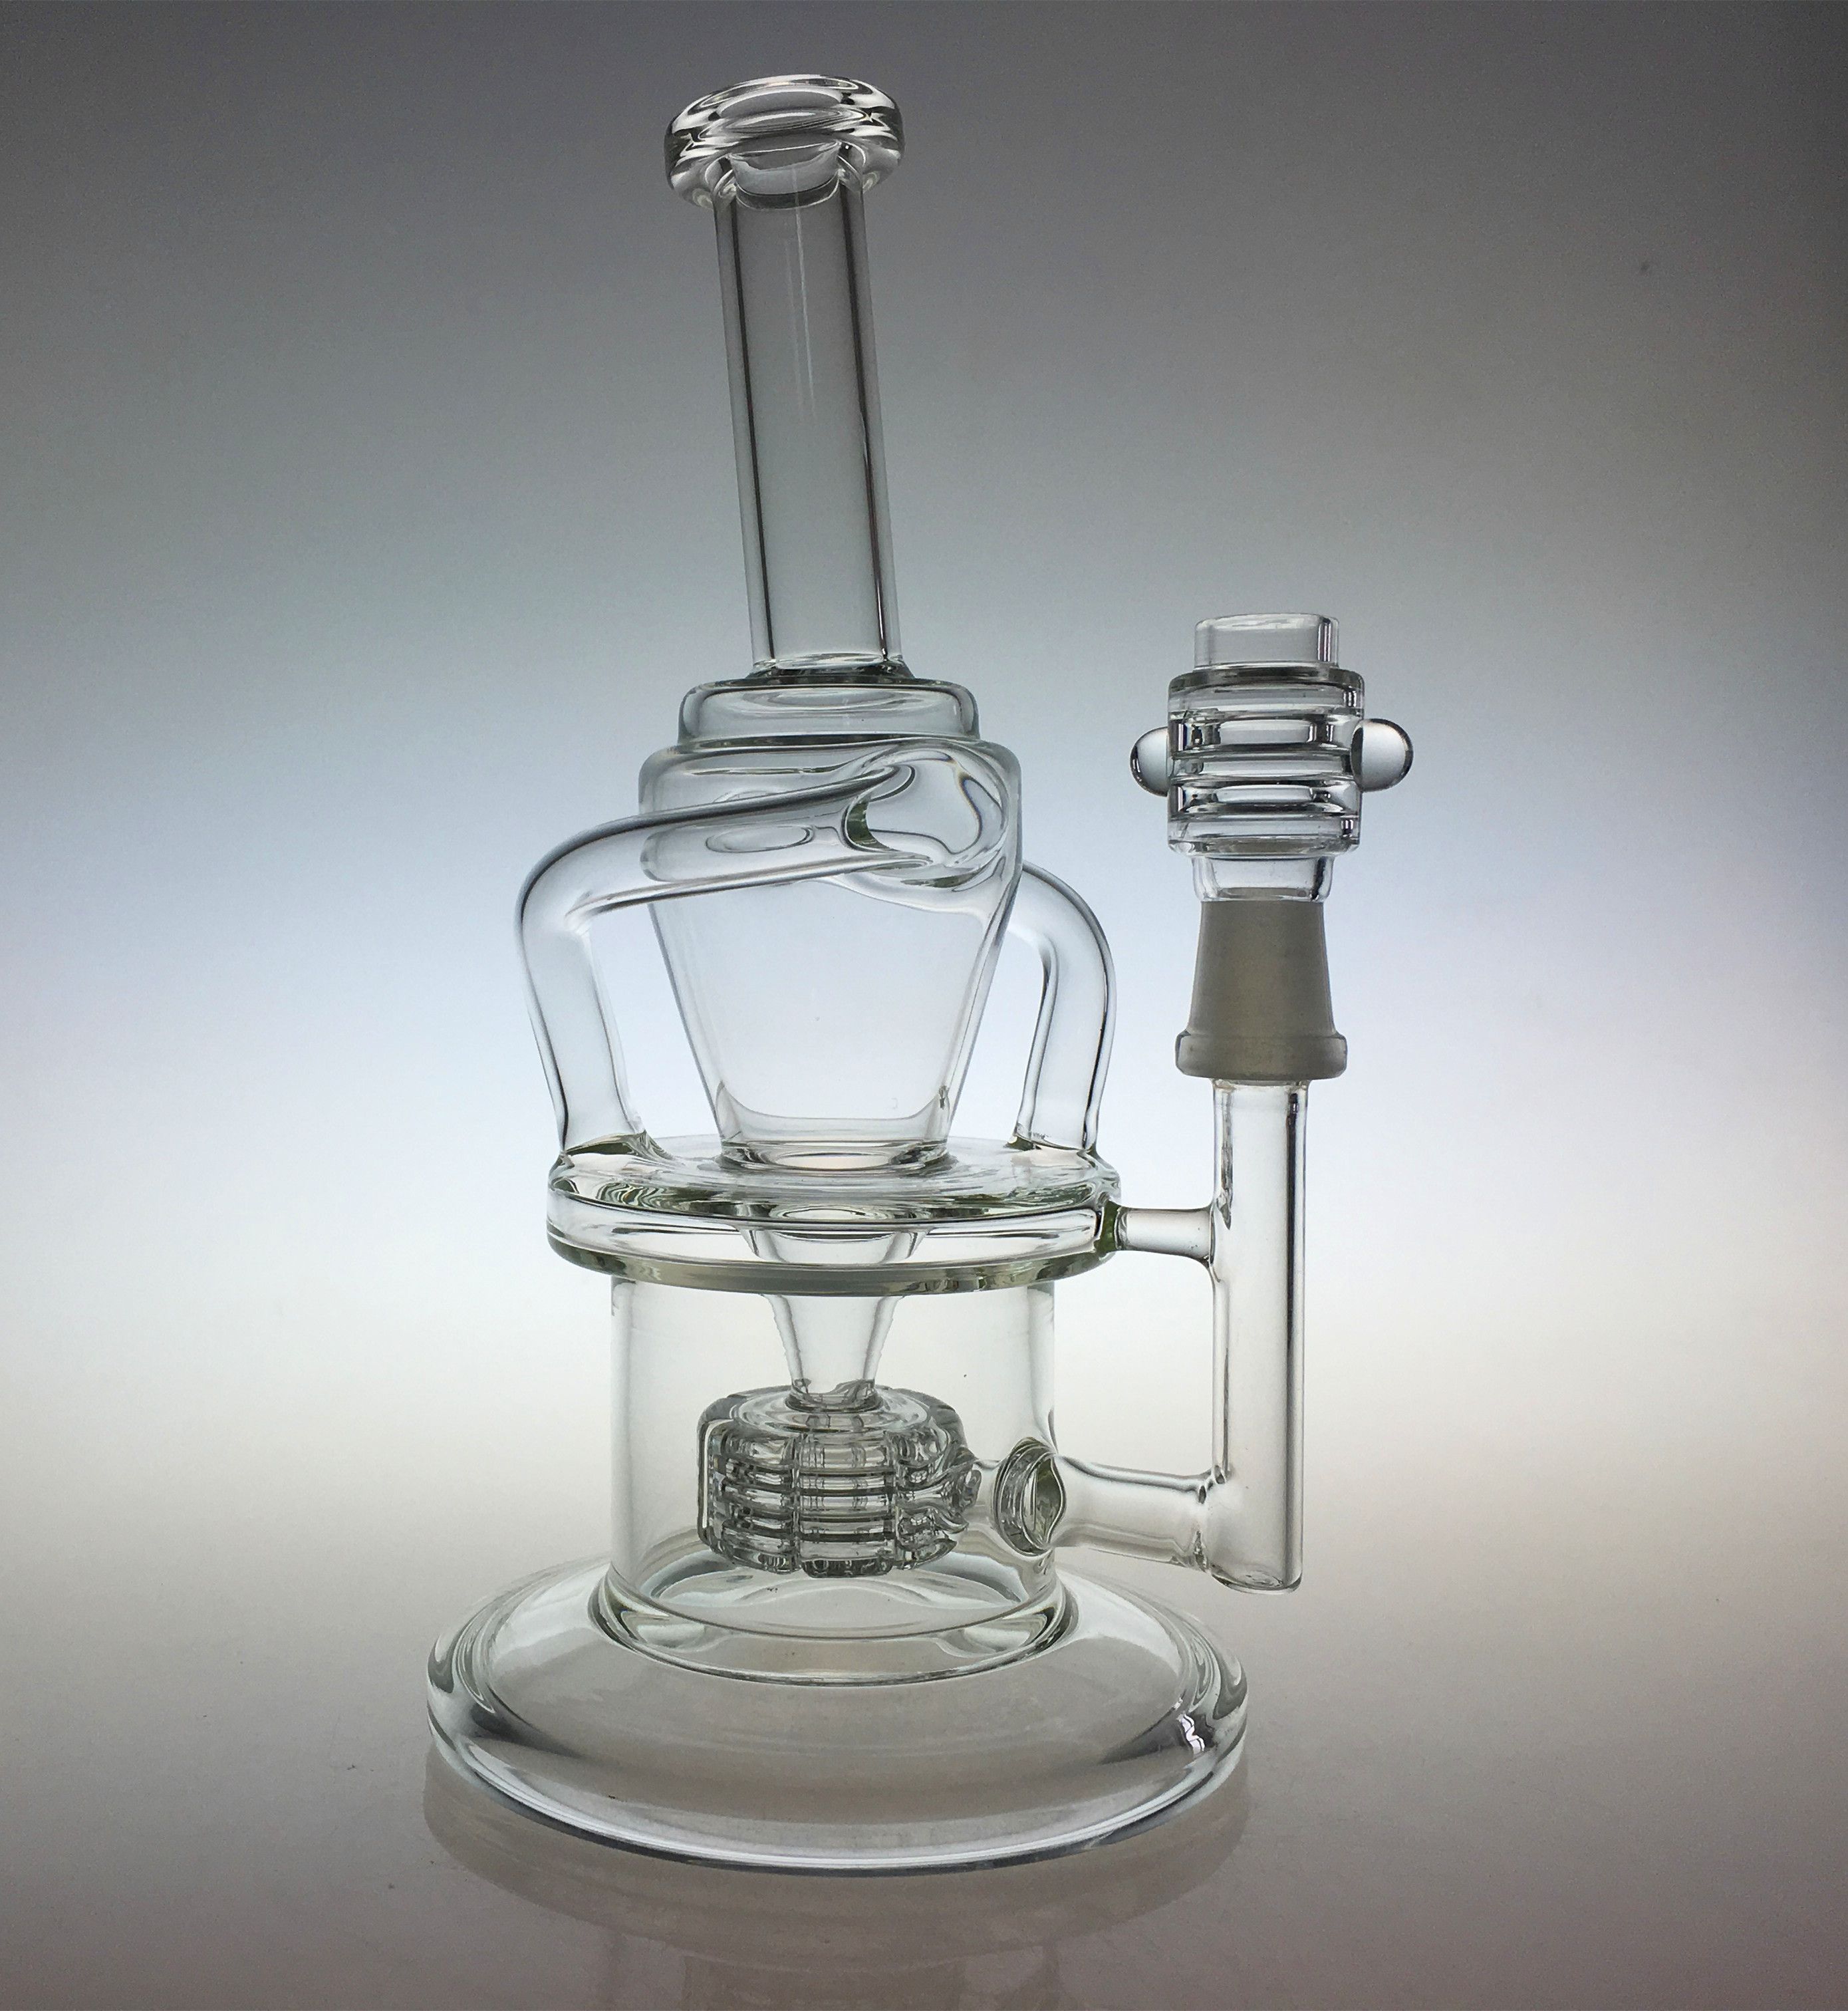 Wake%20&%20Bake%20New%20Bongs%20Glass%20oil%20rigs%20incycler%20water%20pipes%20with%20matrix%20stereo%20perc.jpg